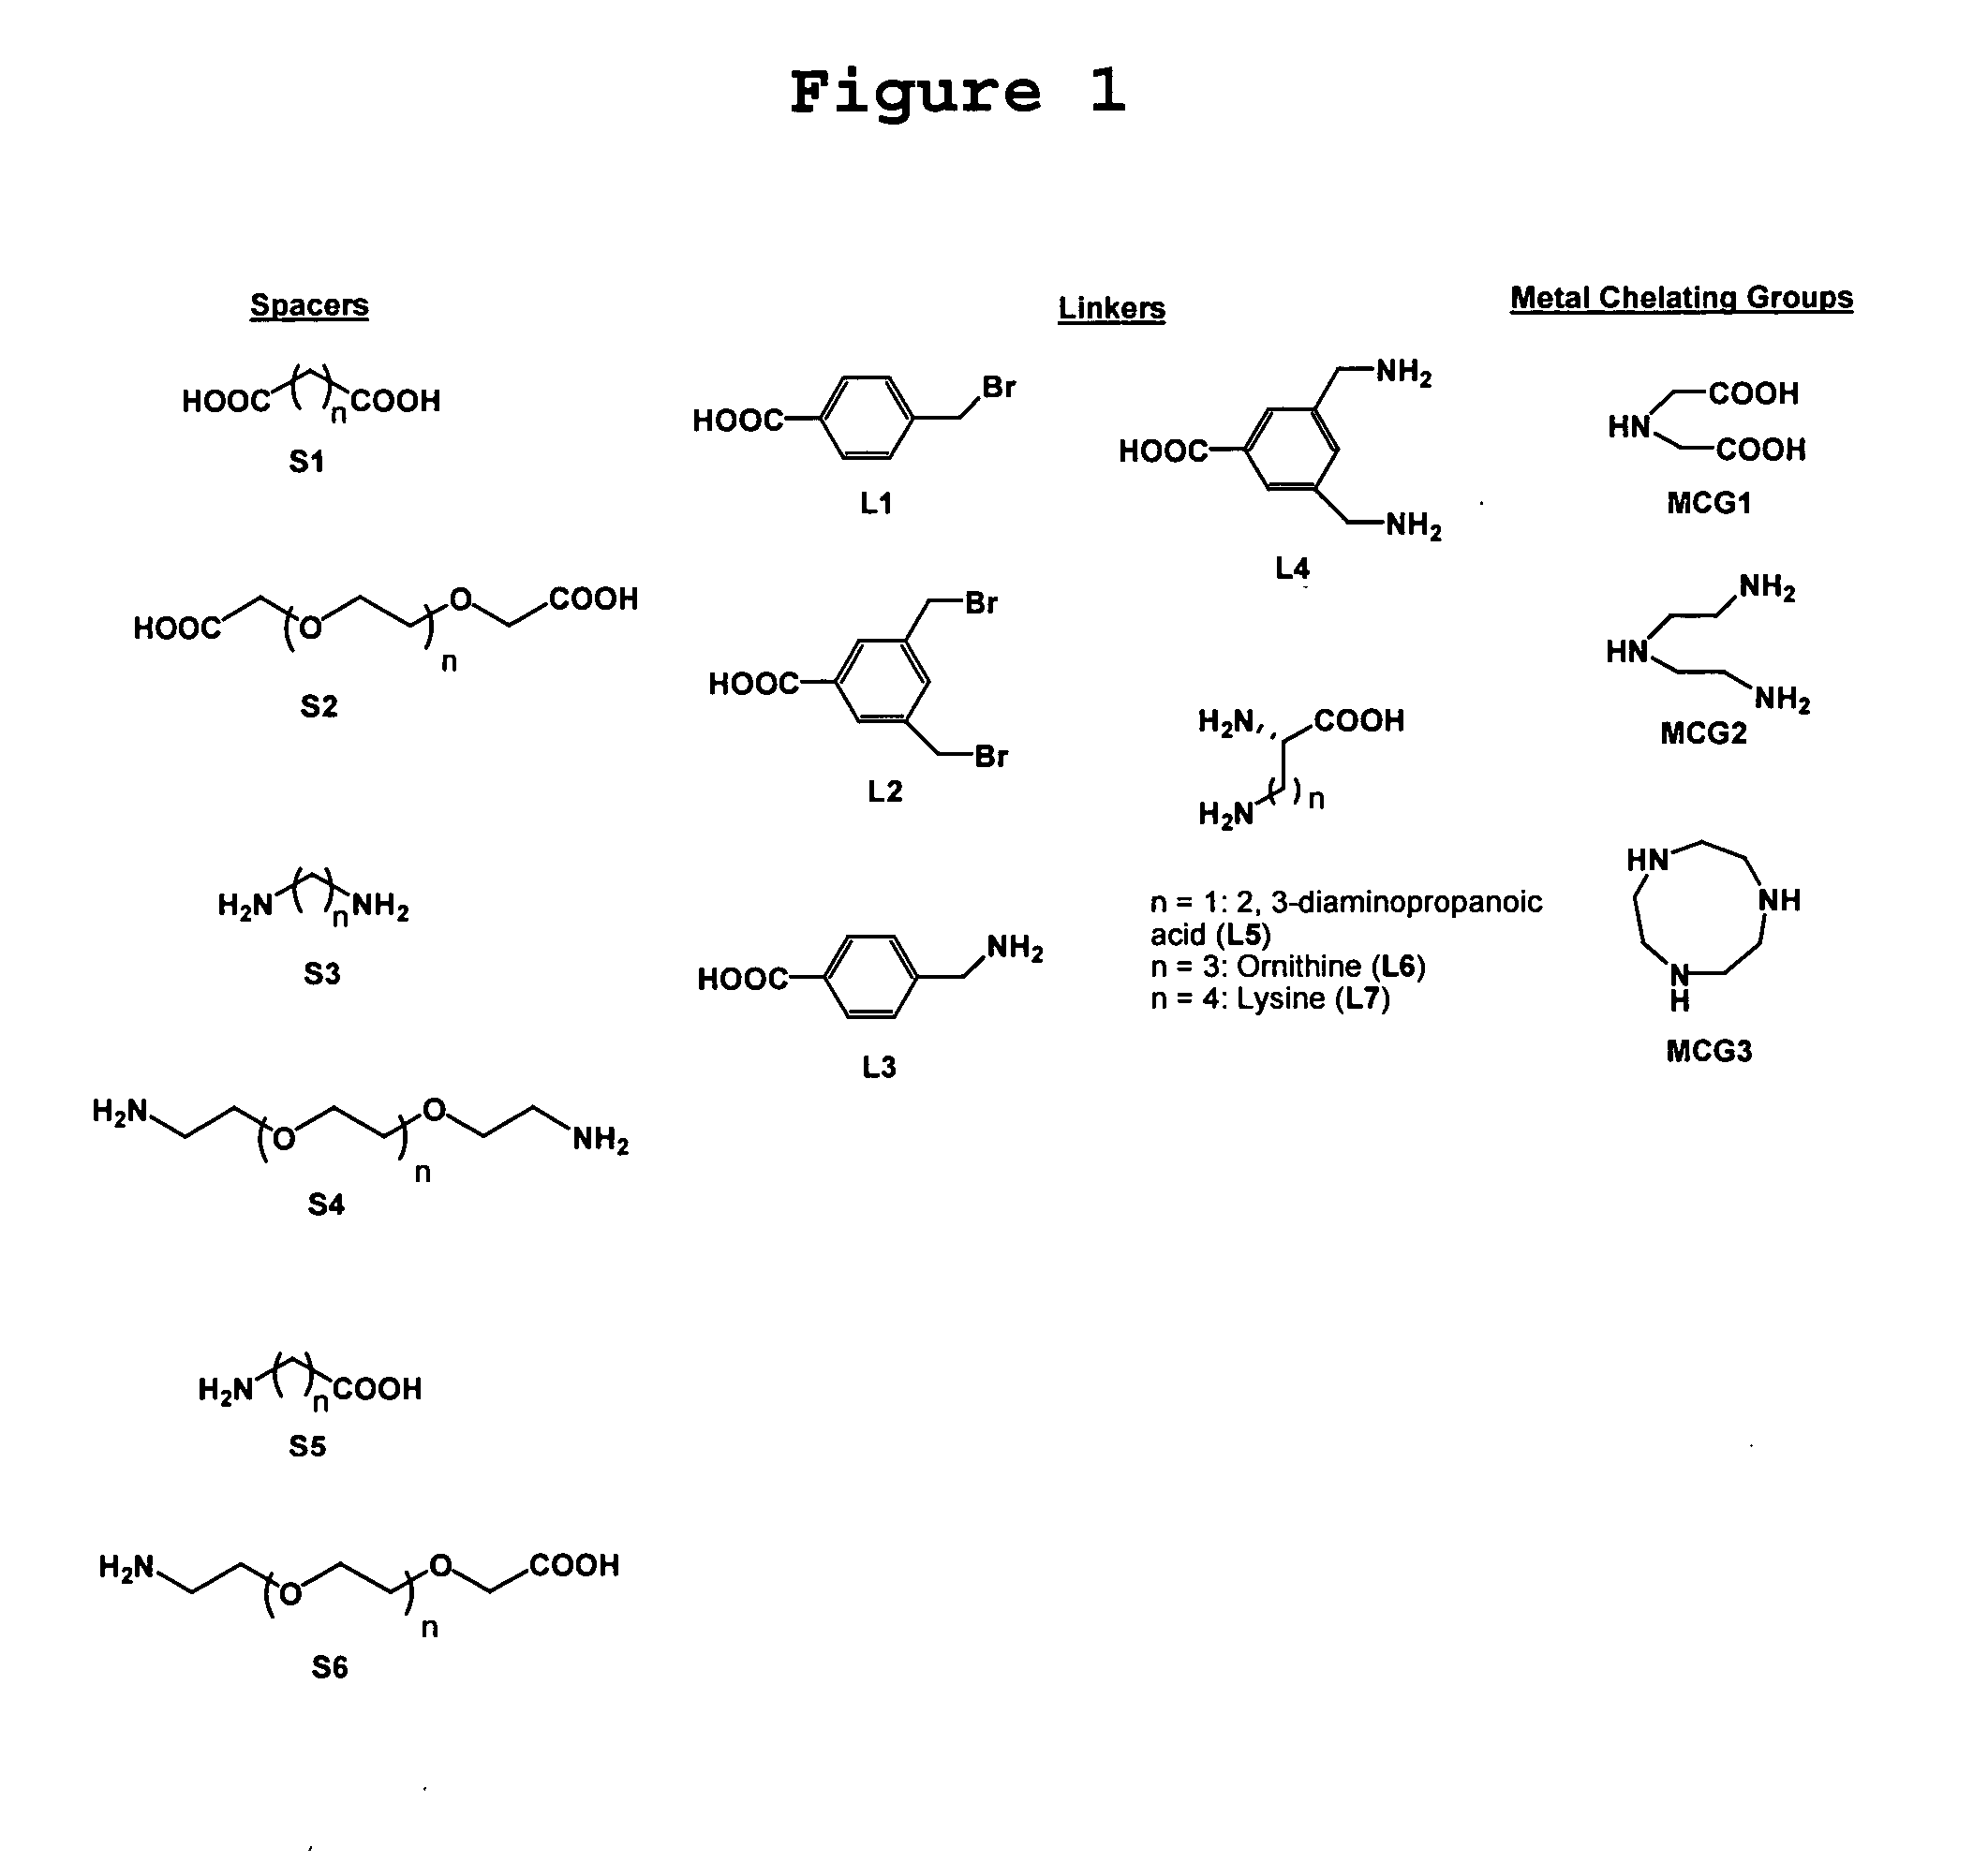 Methods and materials for enhancing the effects of protein modulators